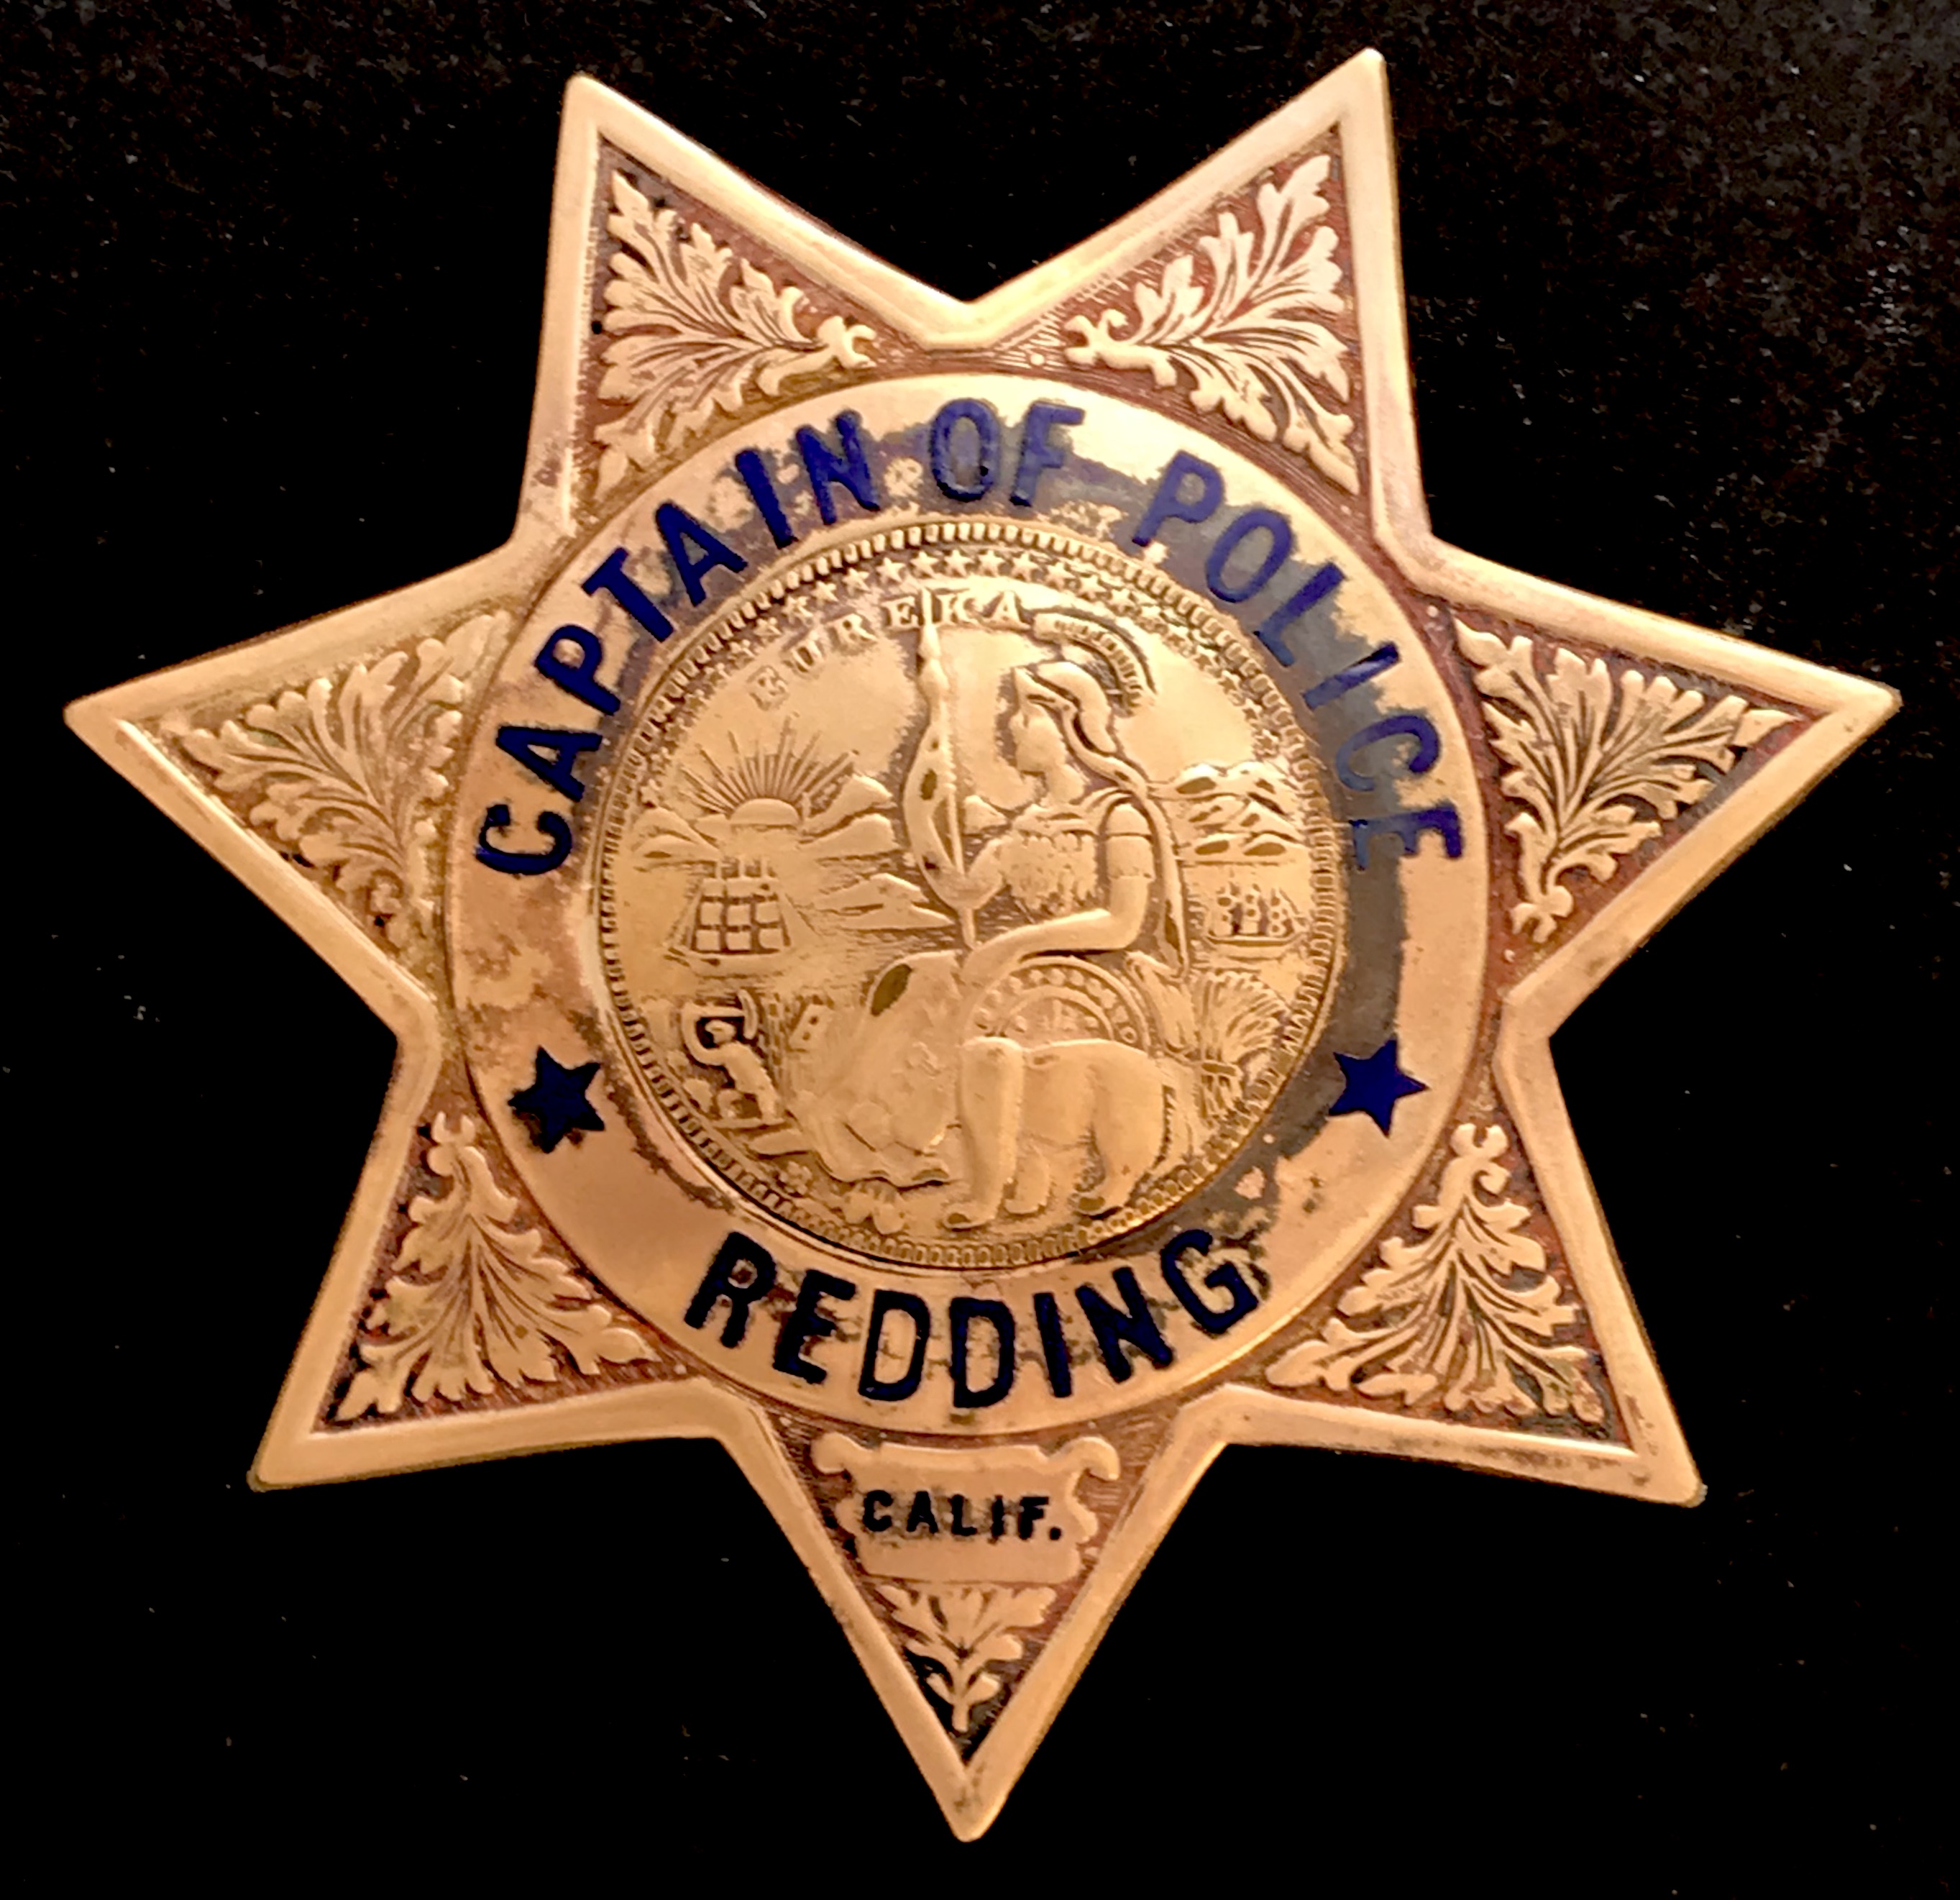 Personal badge of Bob Coulter Redding Police Captain.  Made by Ed Jones Oakland, CAL.  Gold Front.